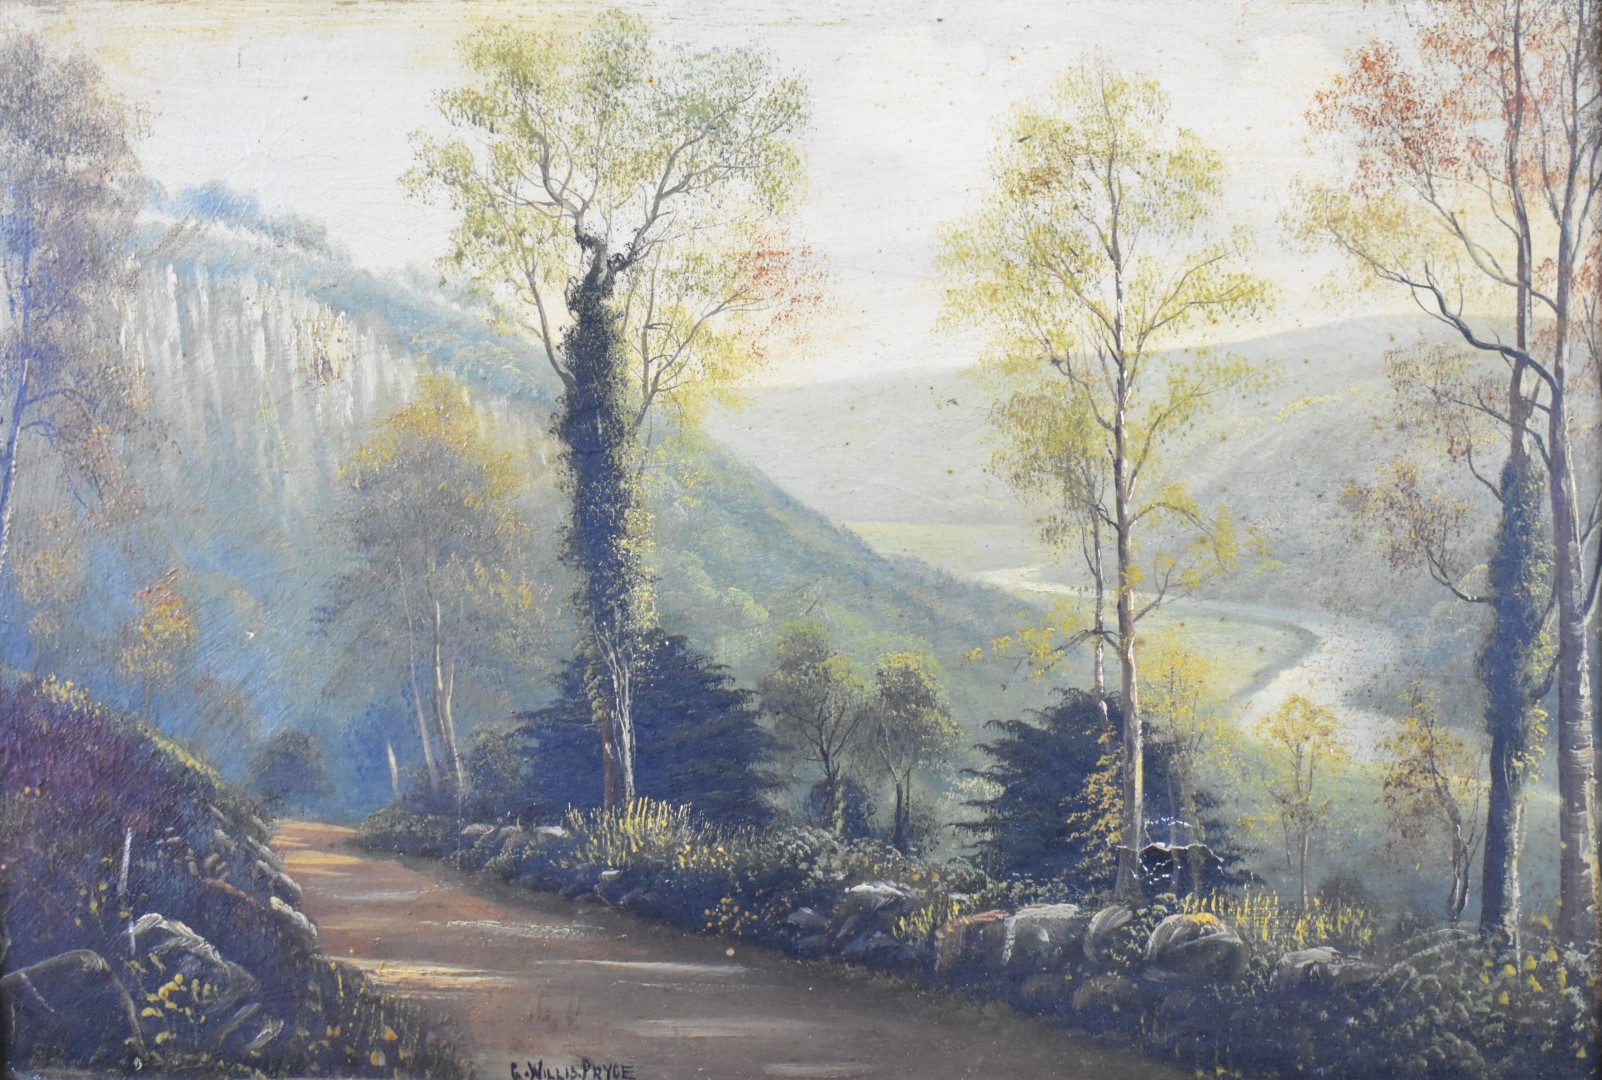 George Willis-Pryce (1866-1949) pair of oil on board landscapes, likely Wye valley scenes, both - Image 3 of 6